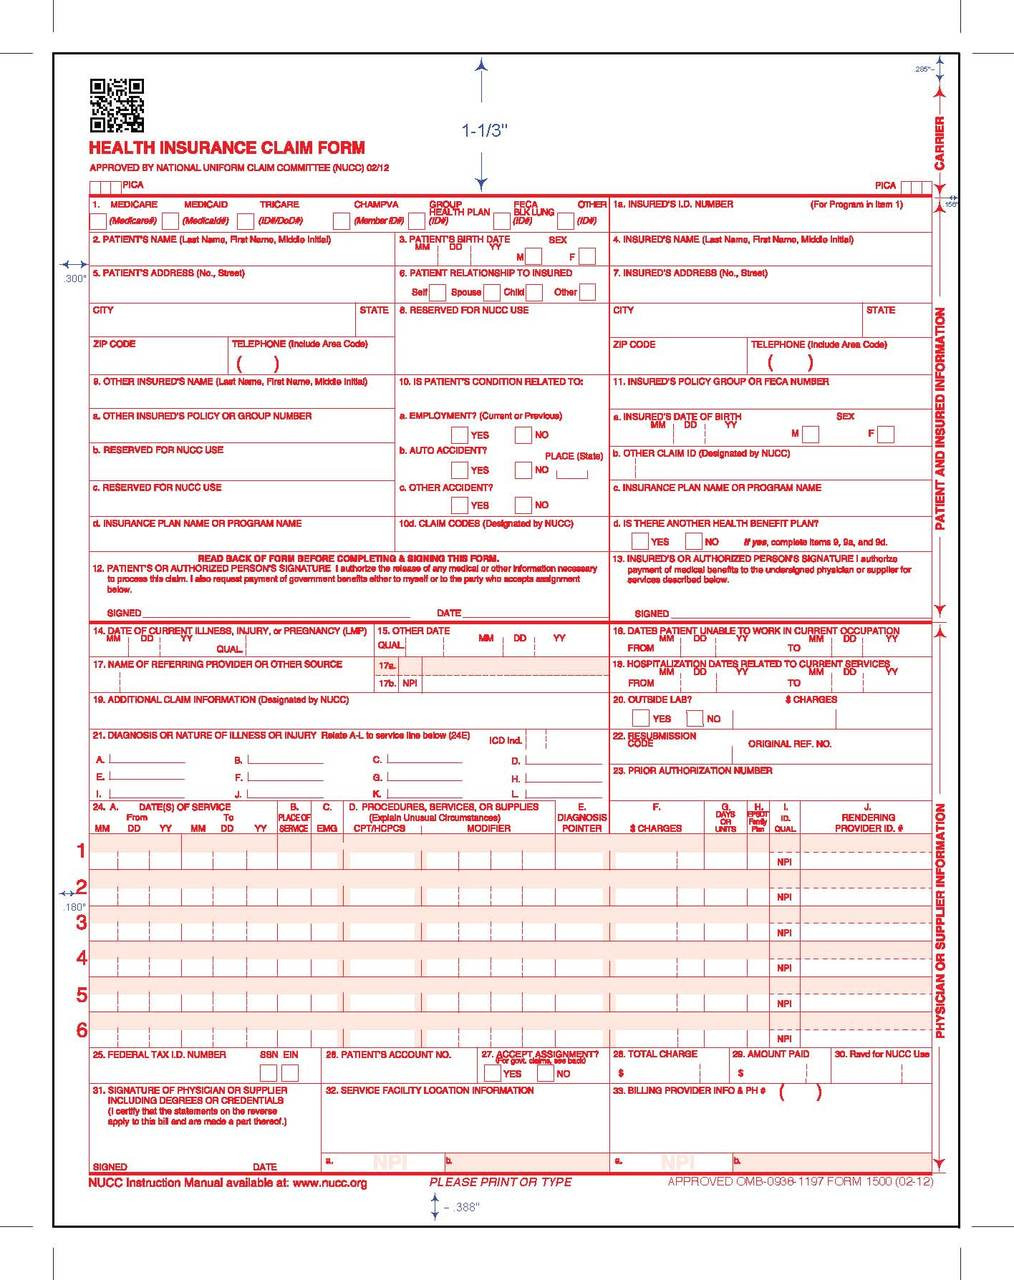 New CMS 1500 02 12 Claim Form Replaces Previous Version 08 05